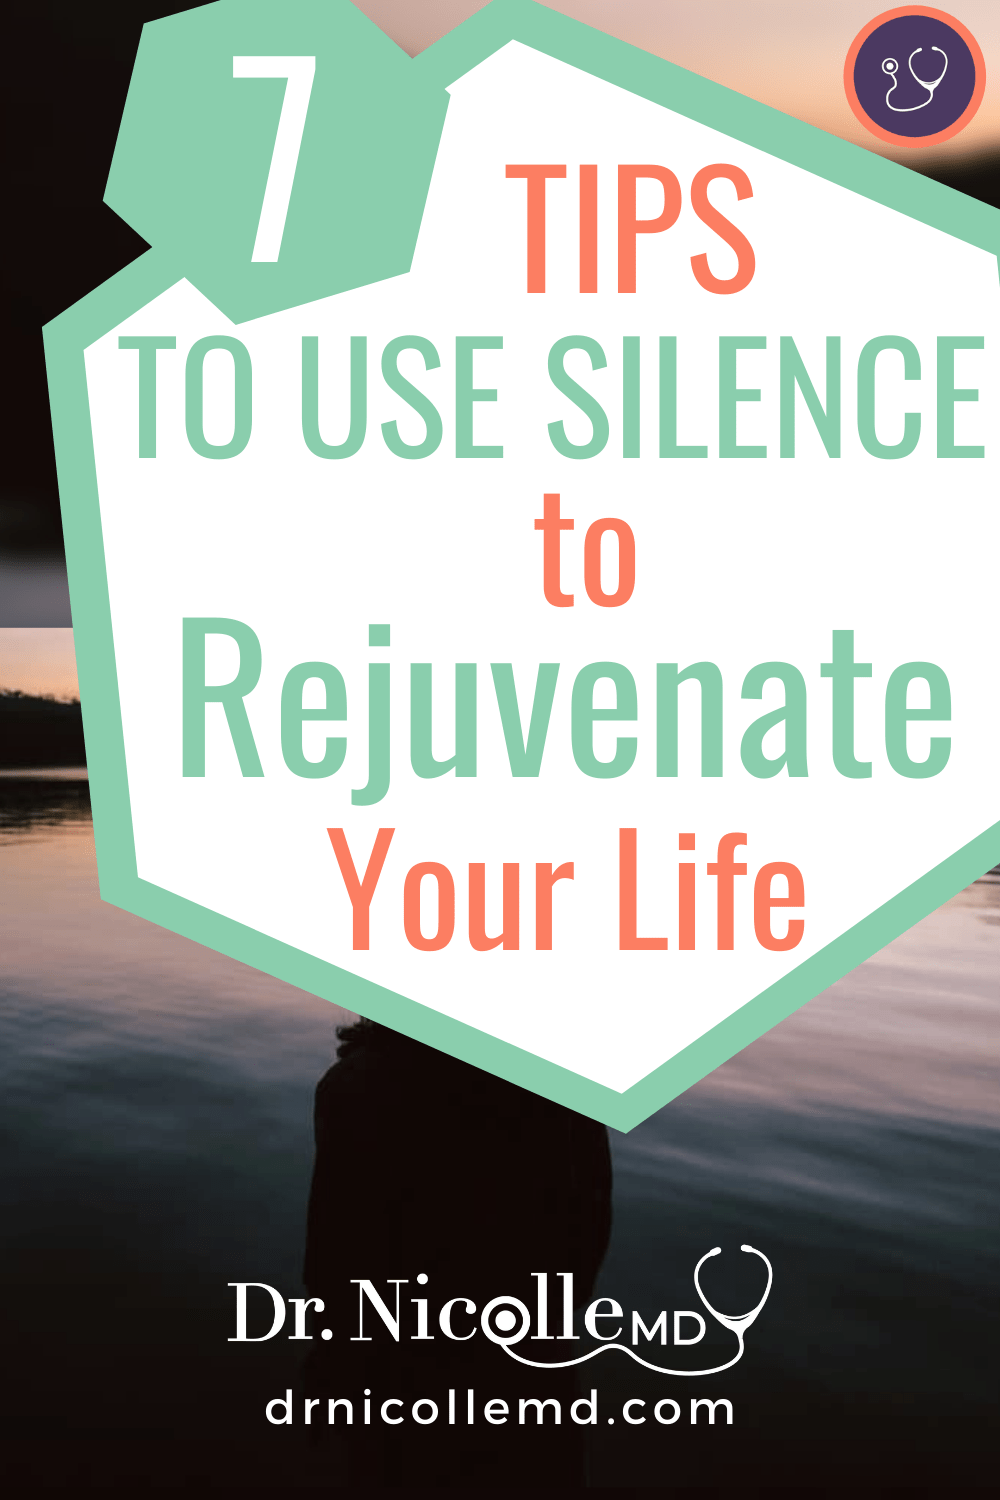 7 Tips to Use Silence to Rejuvenate Your Life